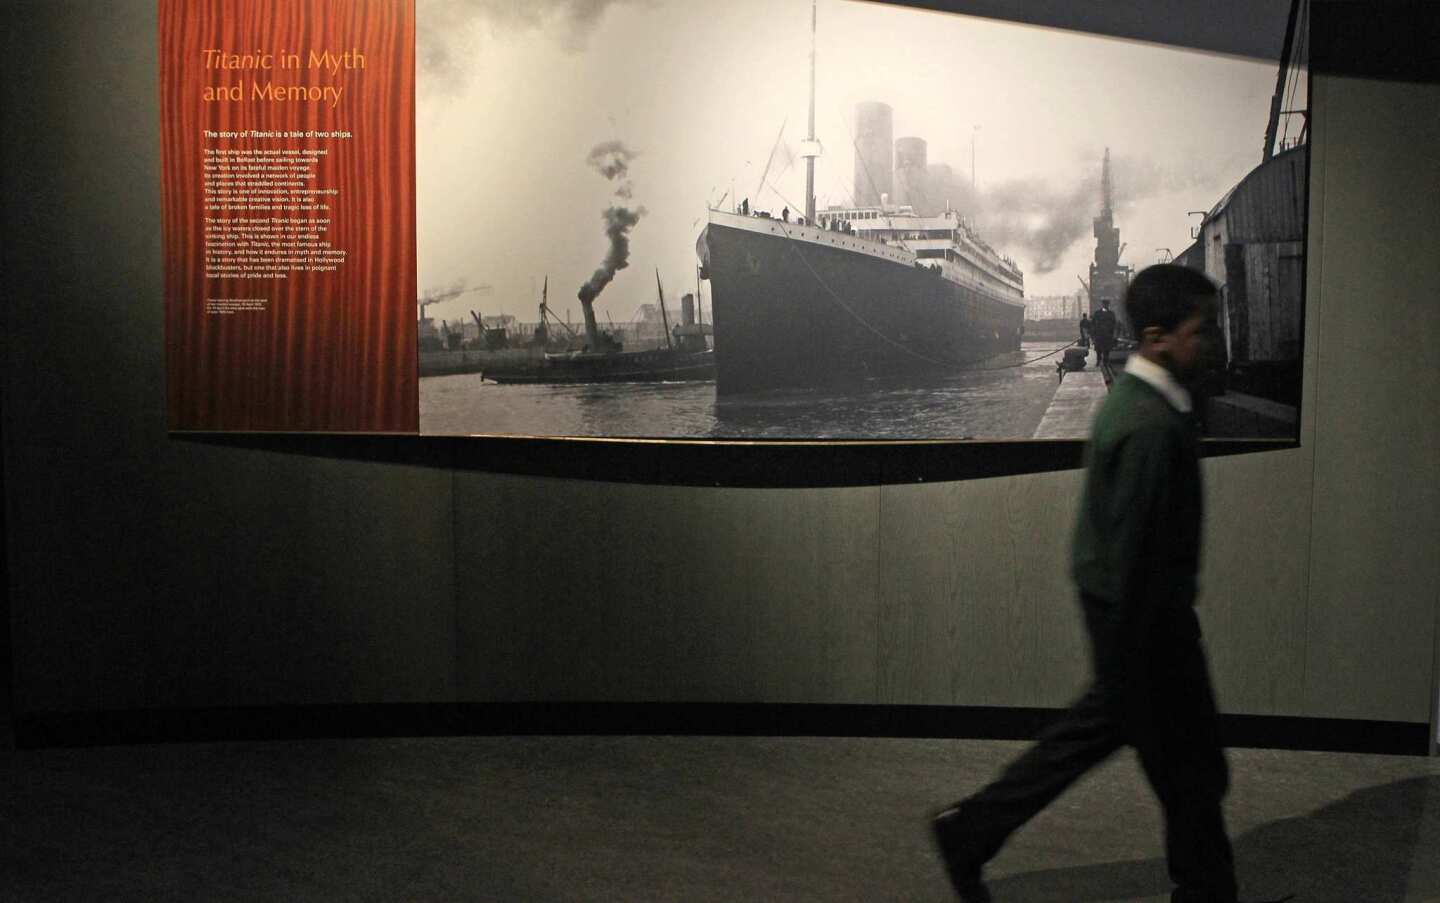 A schoolboy walks past a Titanic display at the Ulster Folk & Transport Museum in Belfast, Northern Ireland. Two exhibitions at the museum focus on the construction and the human side of the saga of the famed ocean liner, which hit an iceberg and sank on its maiden voyage in 1912.